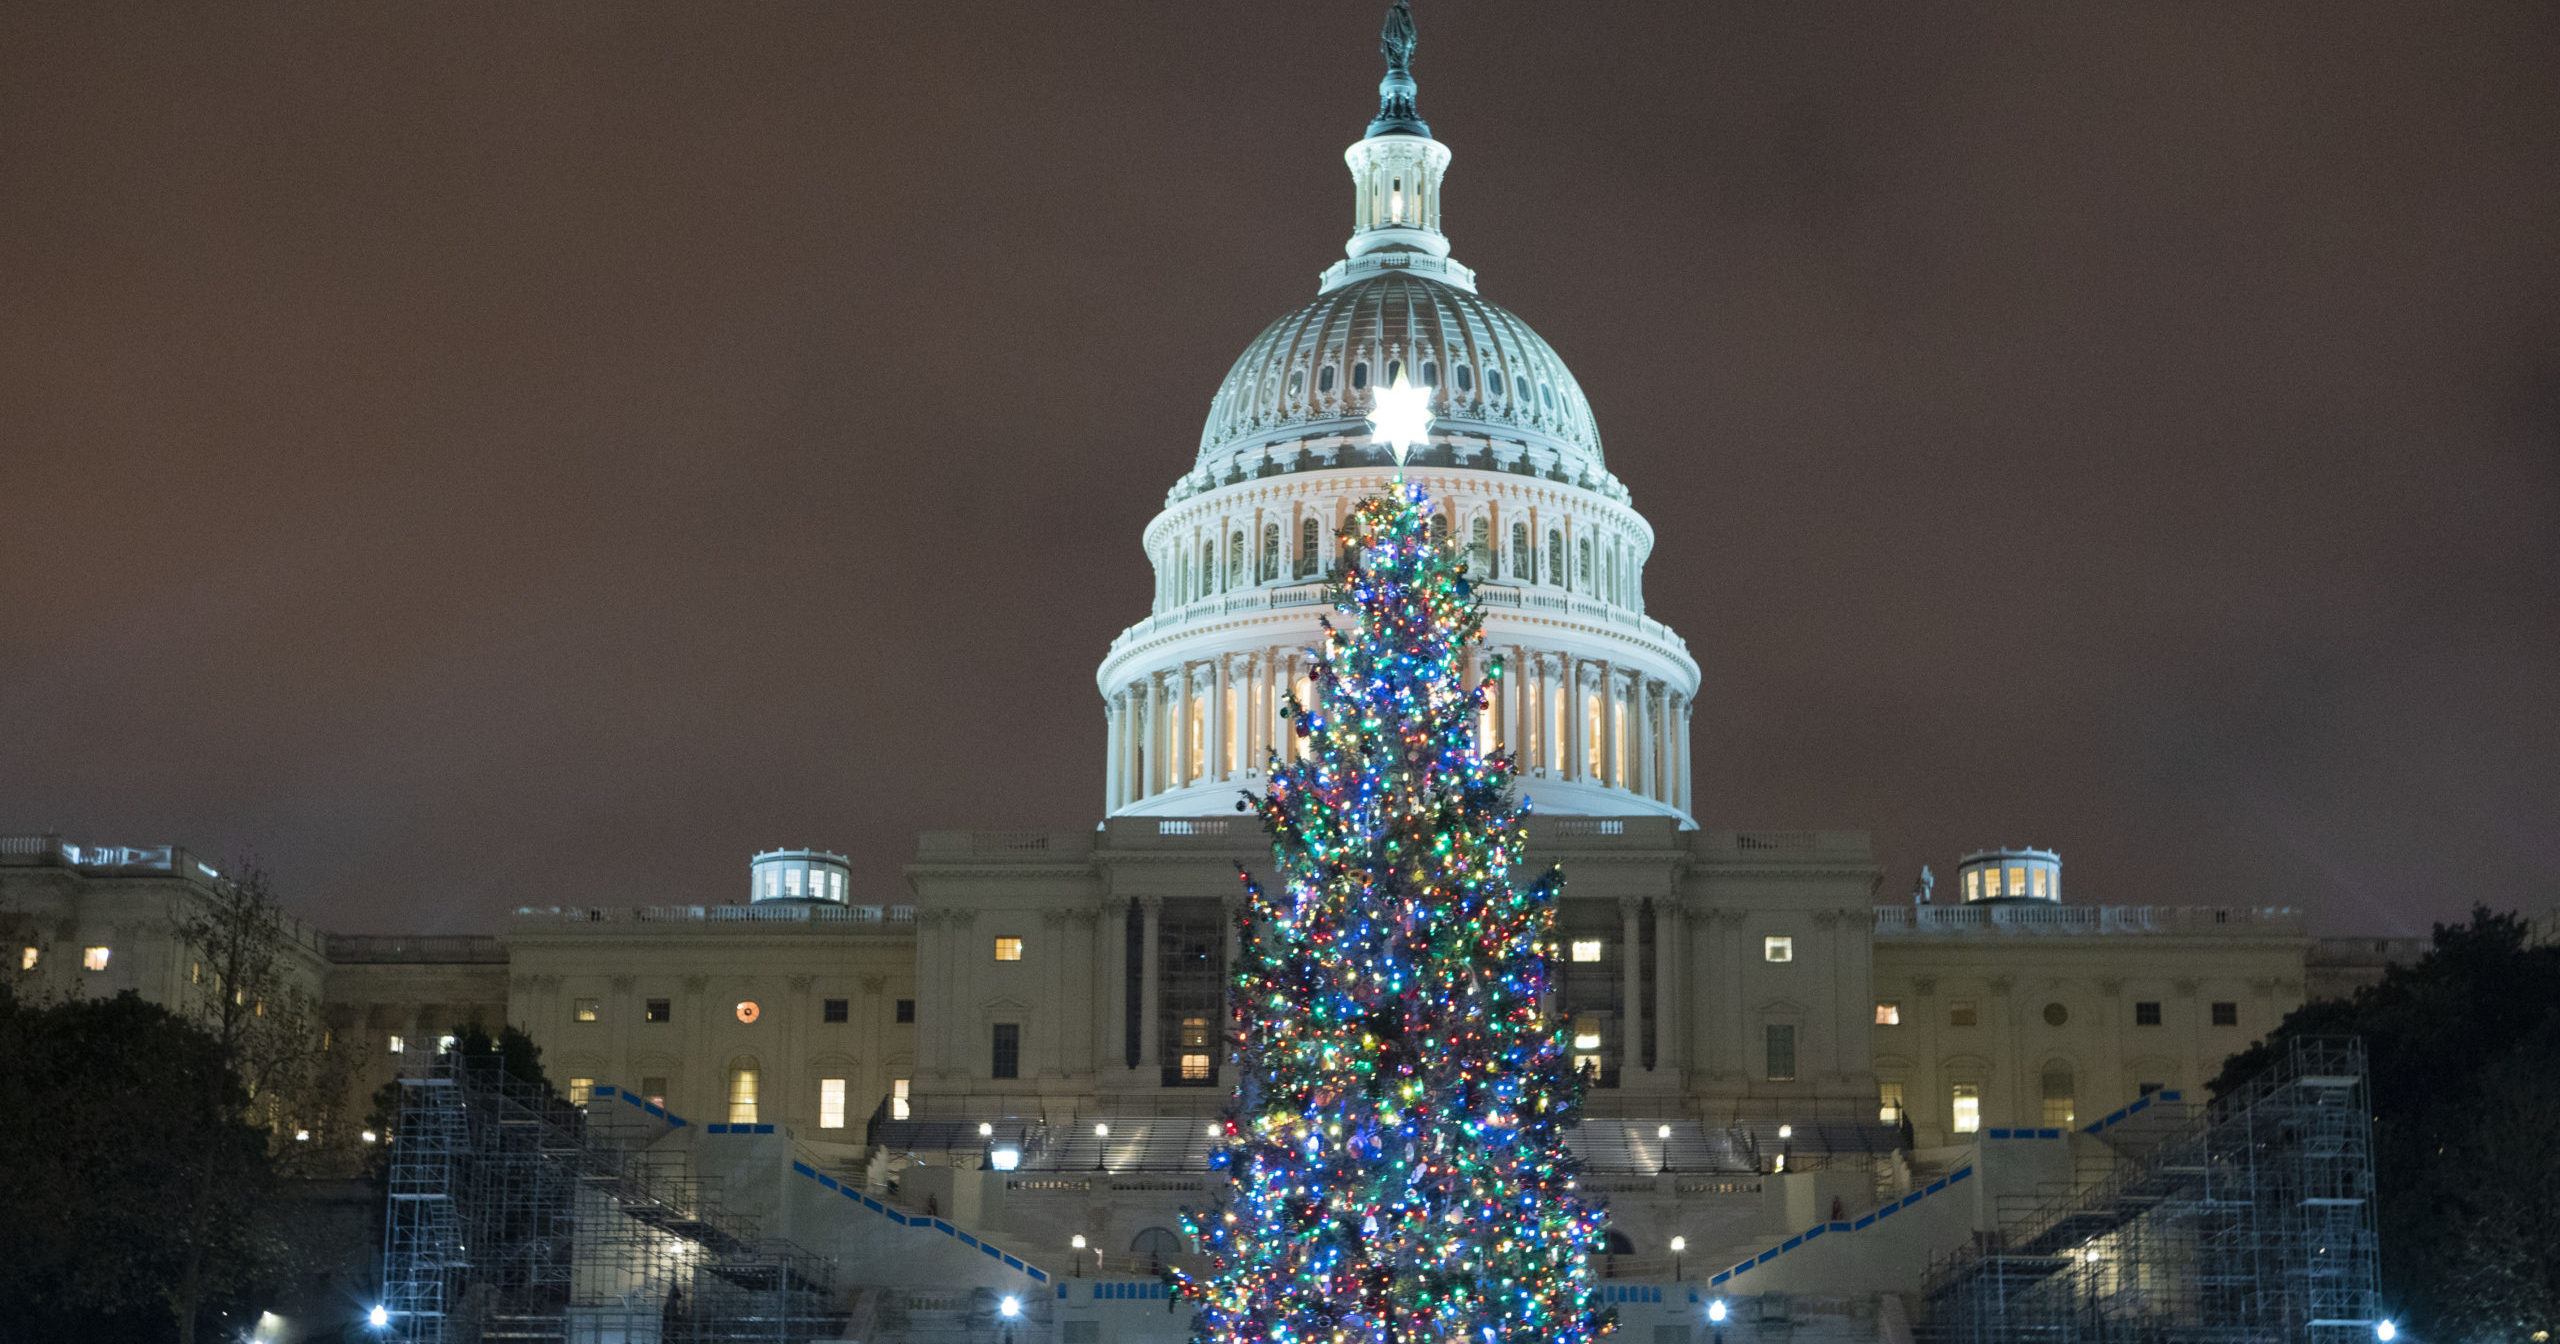 The Christmas tree at the U.S. Capitol in Washington is seen Sunday night after congressional negotiators sealed a $900 billion COVID relief deal.